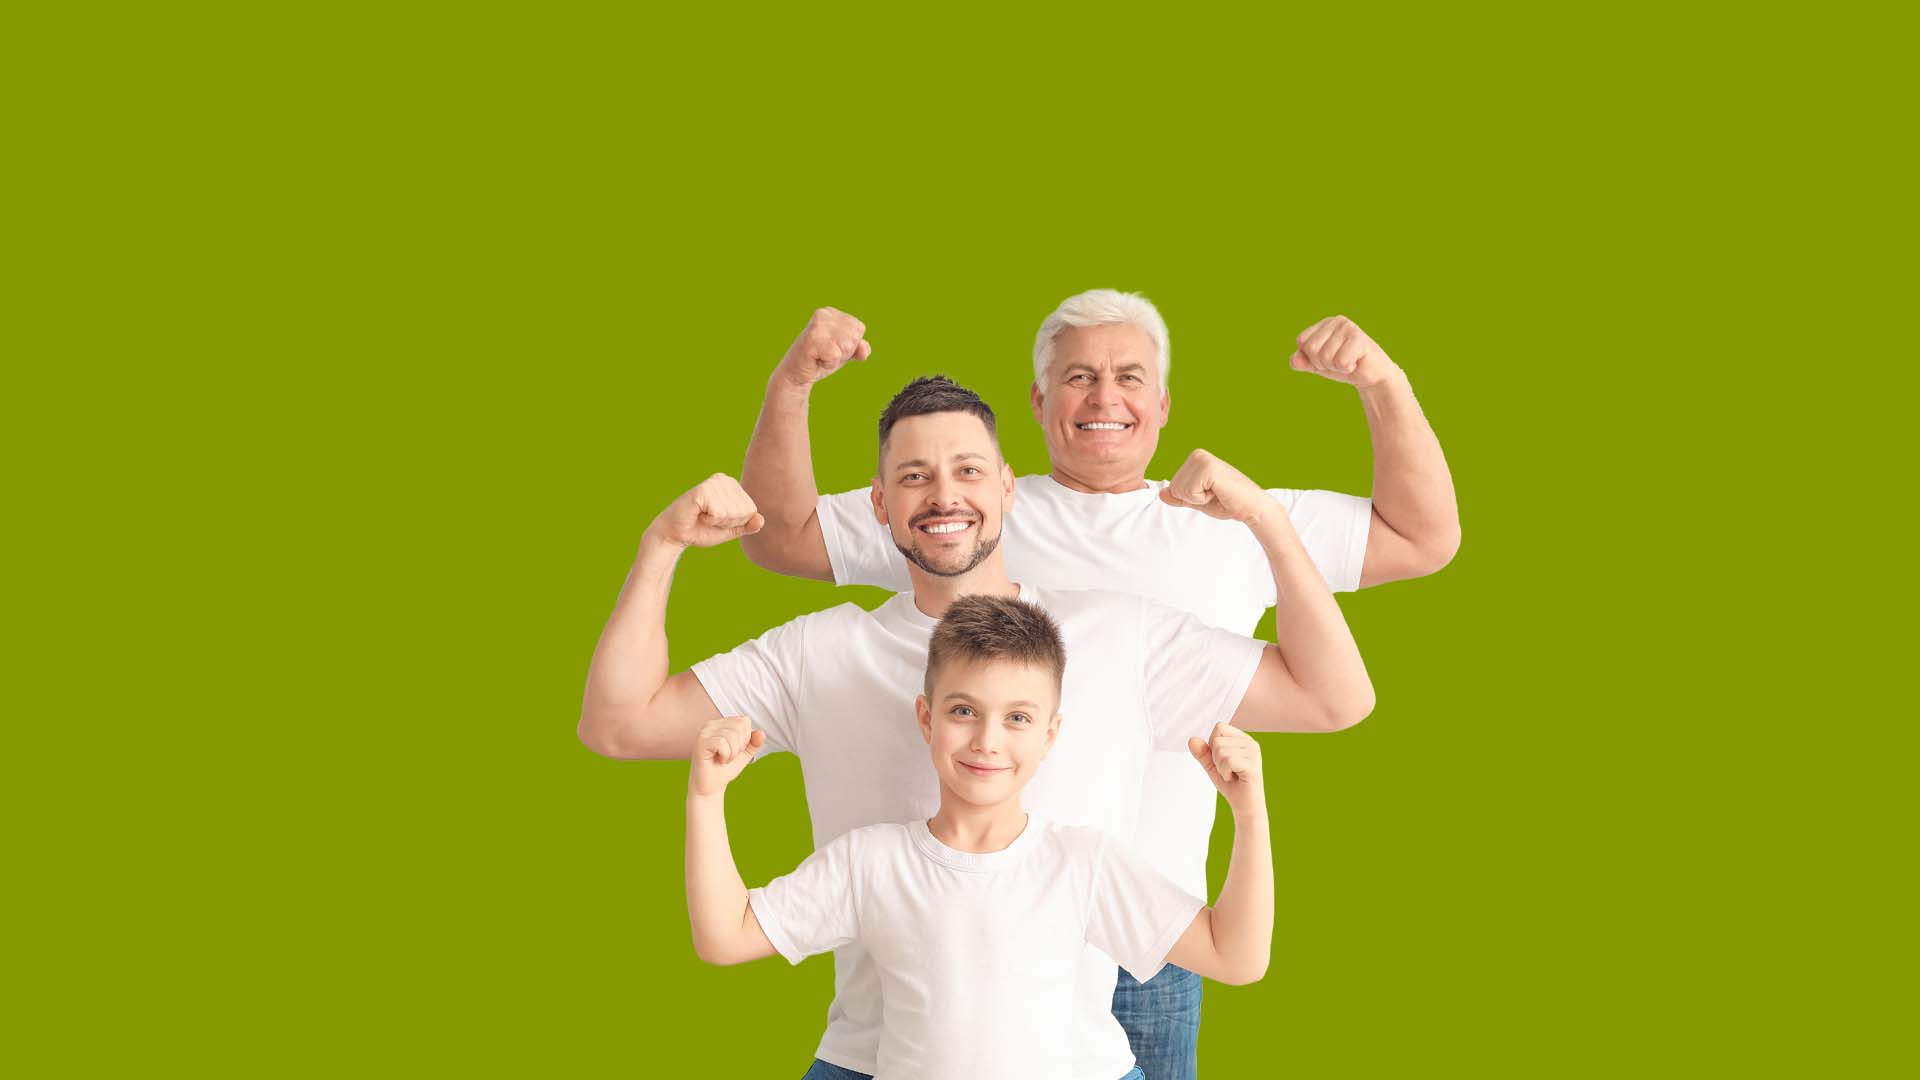 Featured image for “Helping Men Age Positively”